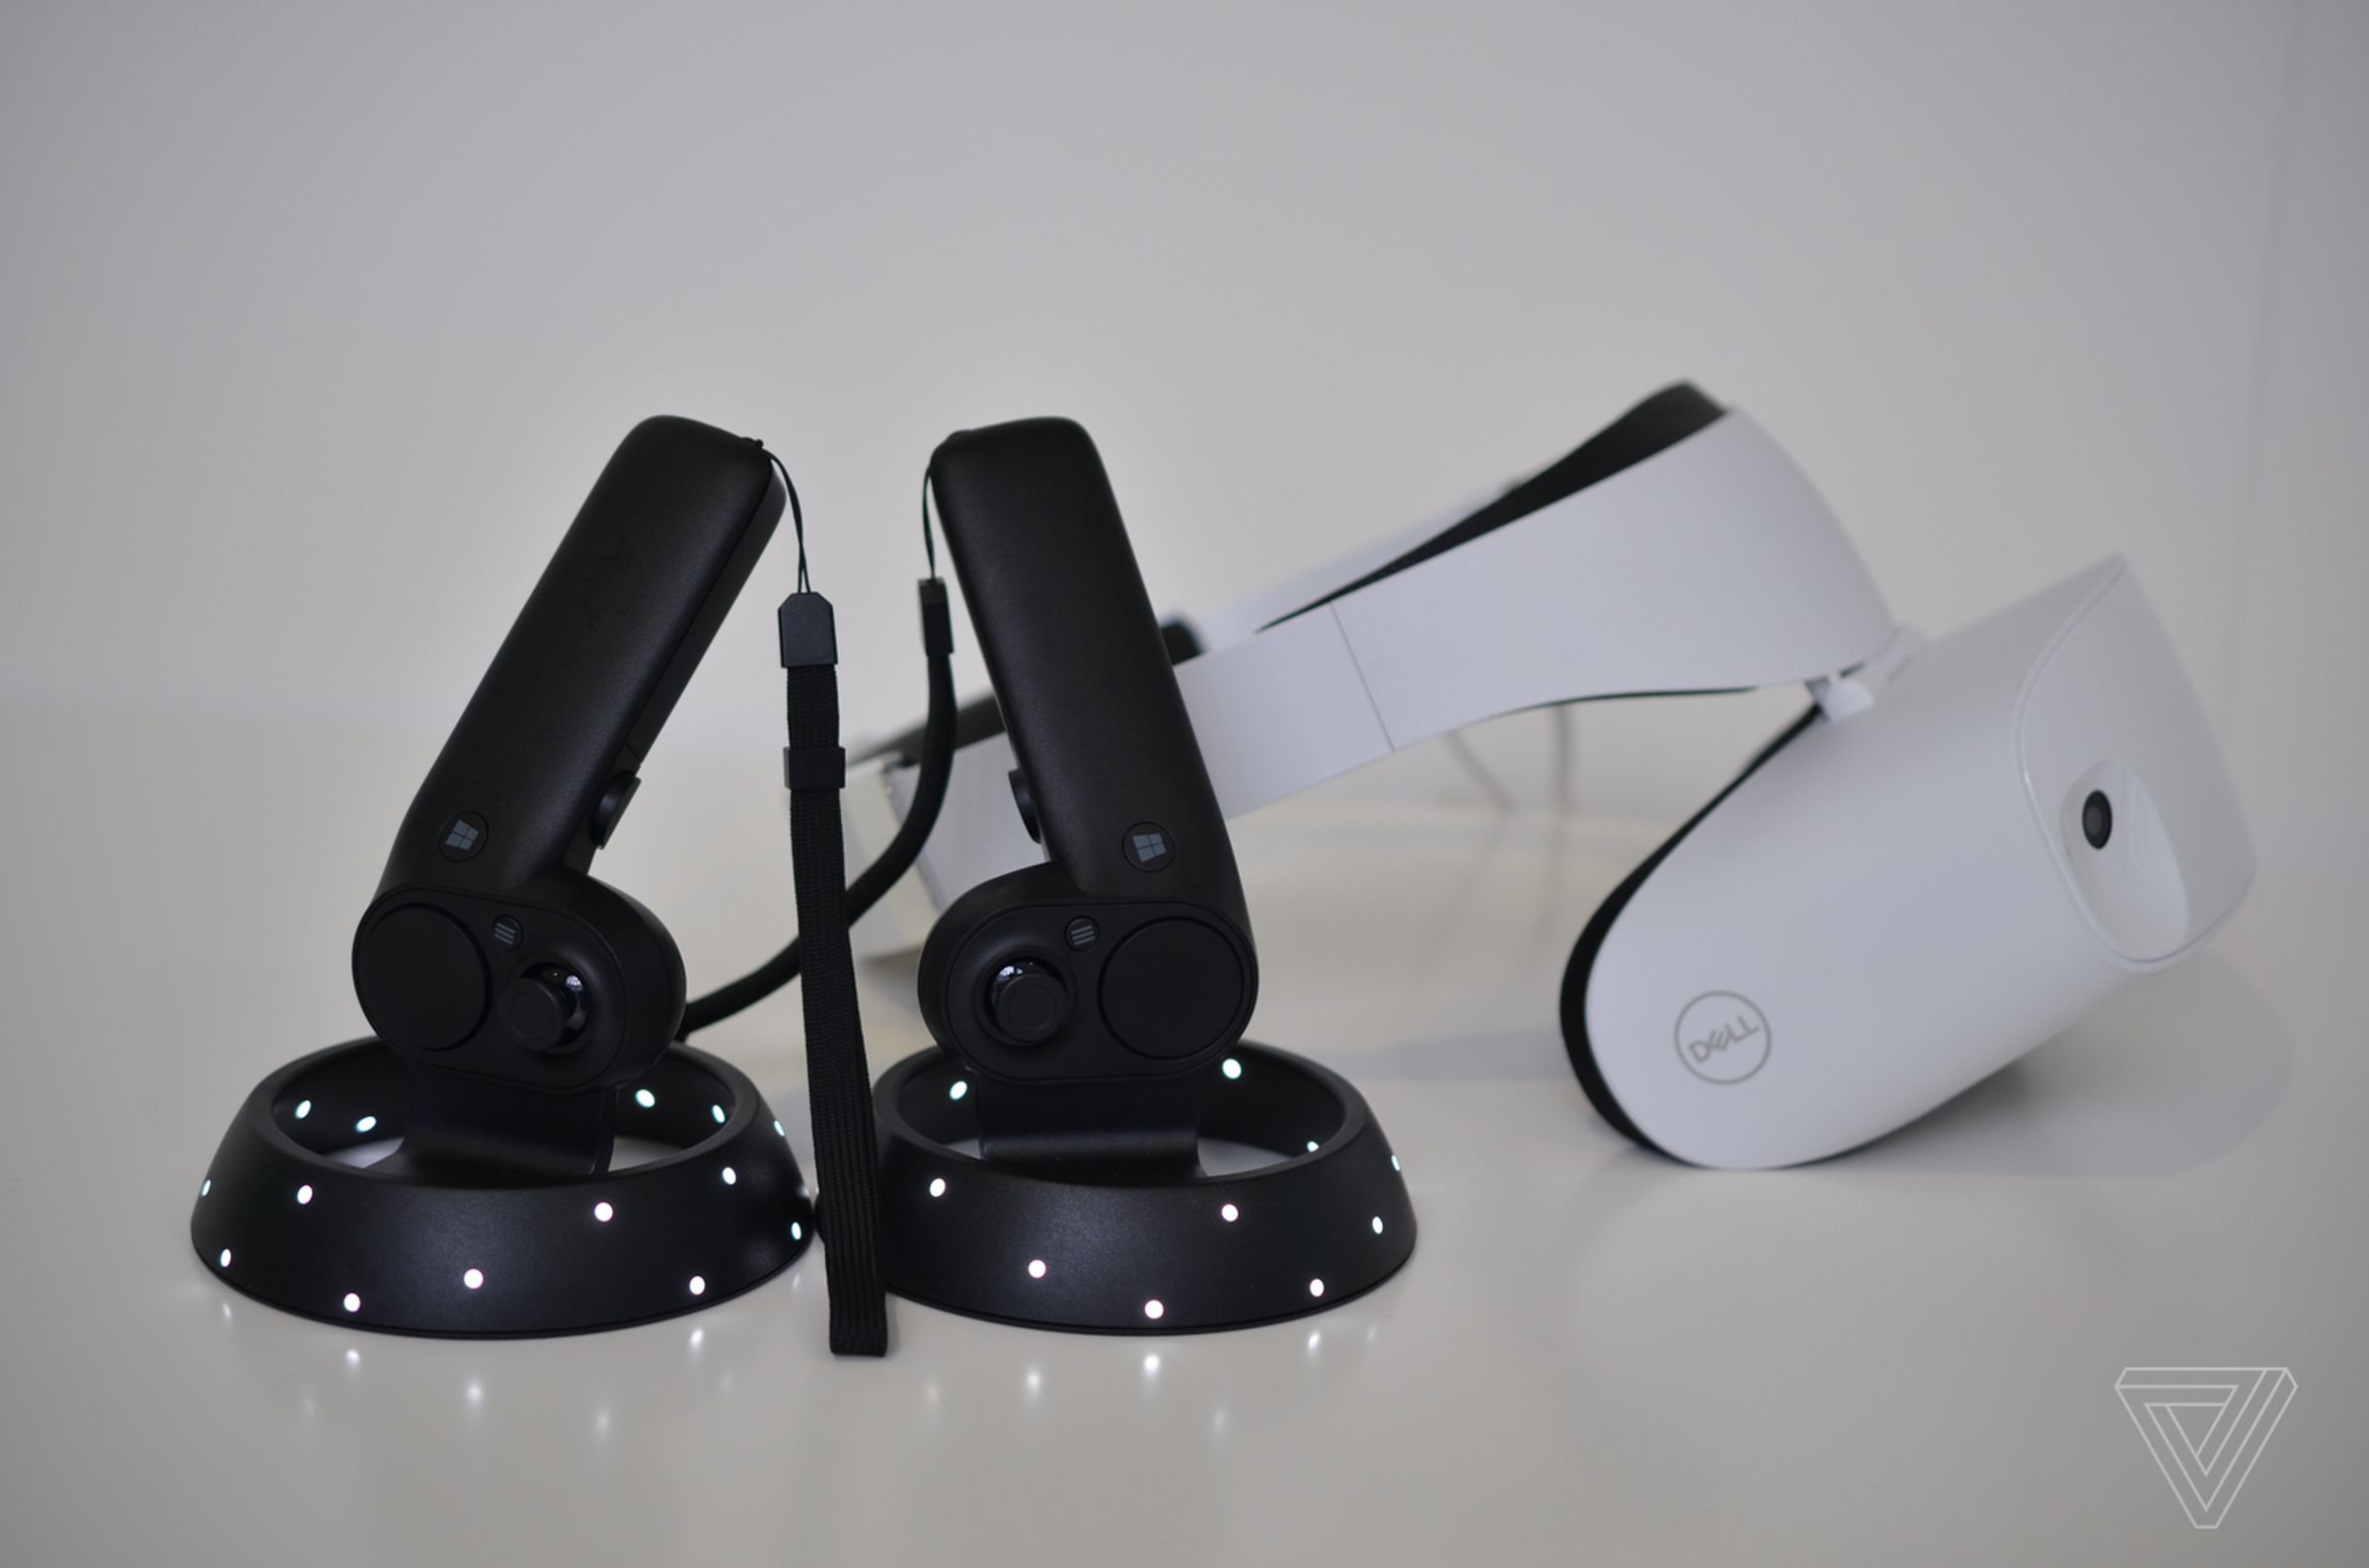 A photo showing a Windows Mixed Reality headset